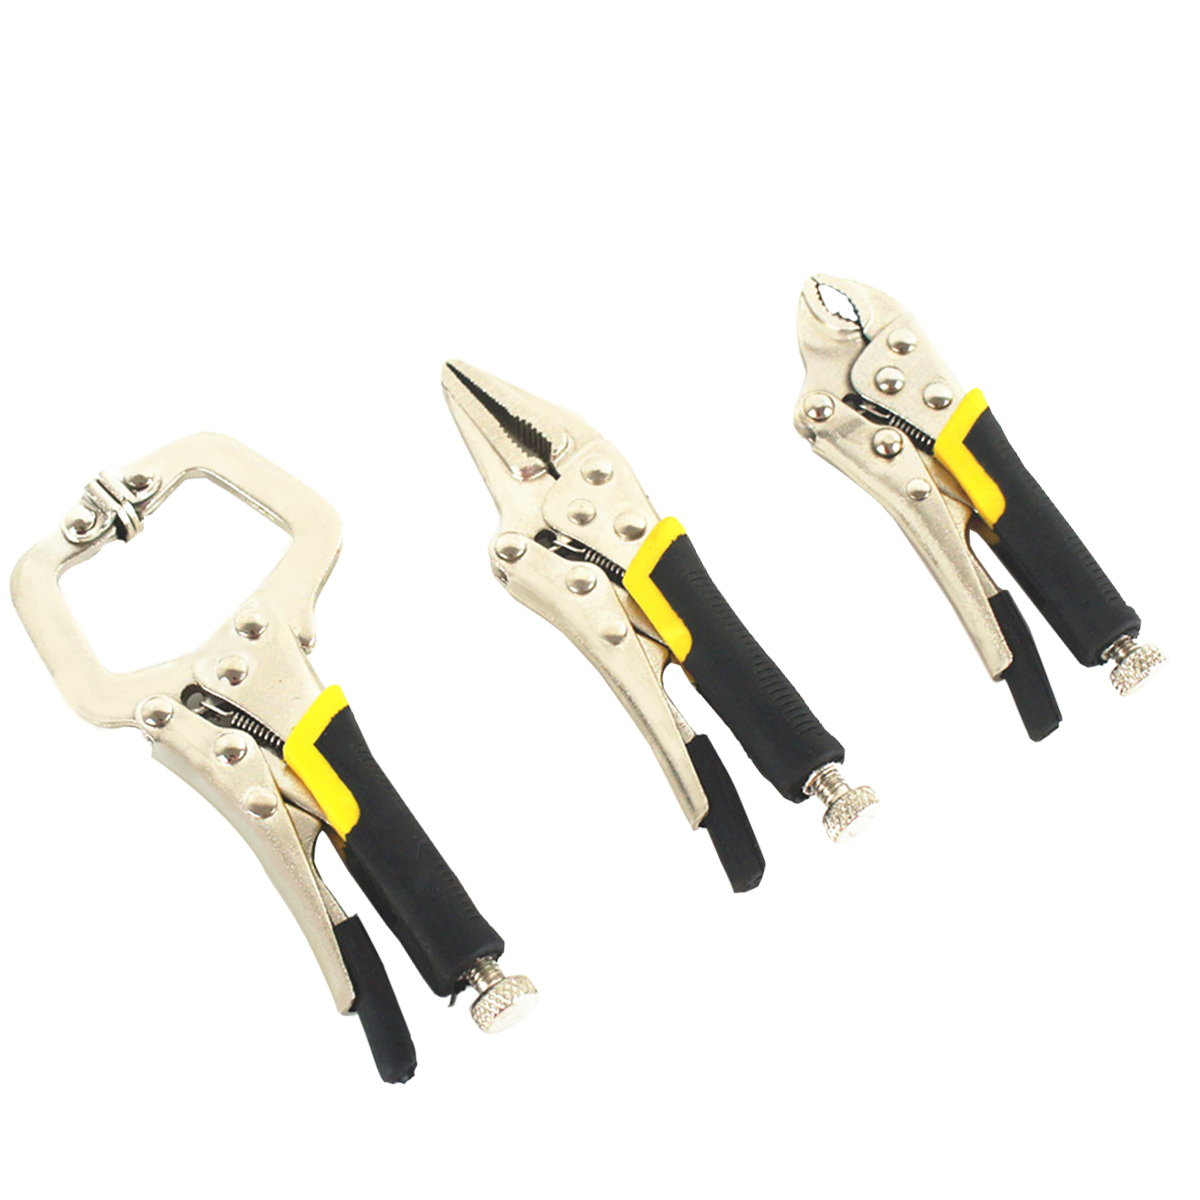 

3 Piece Mini Vice Grip Kit Complete Locking C Clamp Straight Nose and Needle Long Nose Pliers set